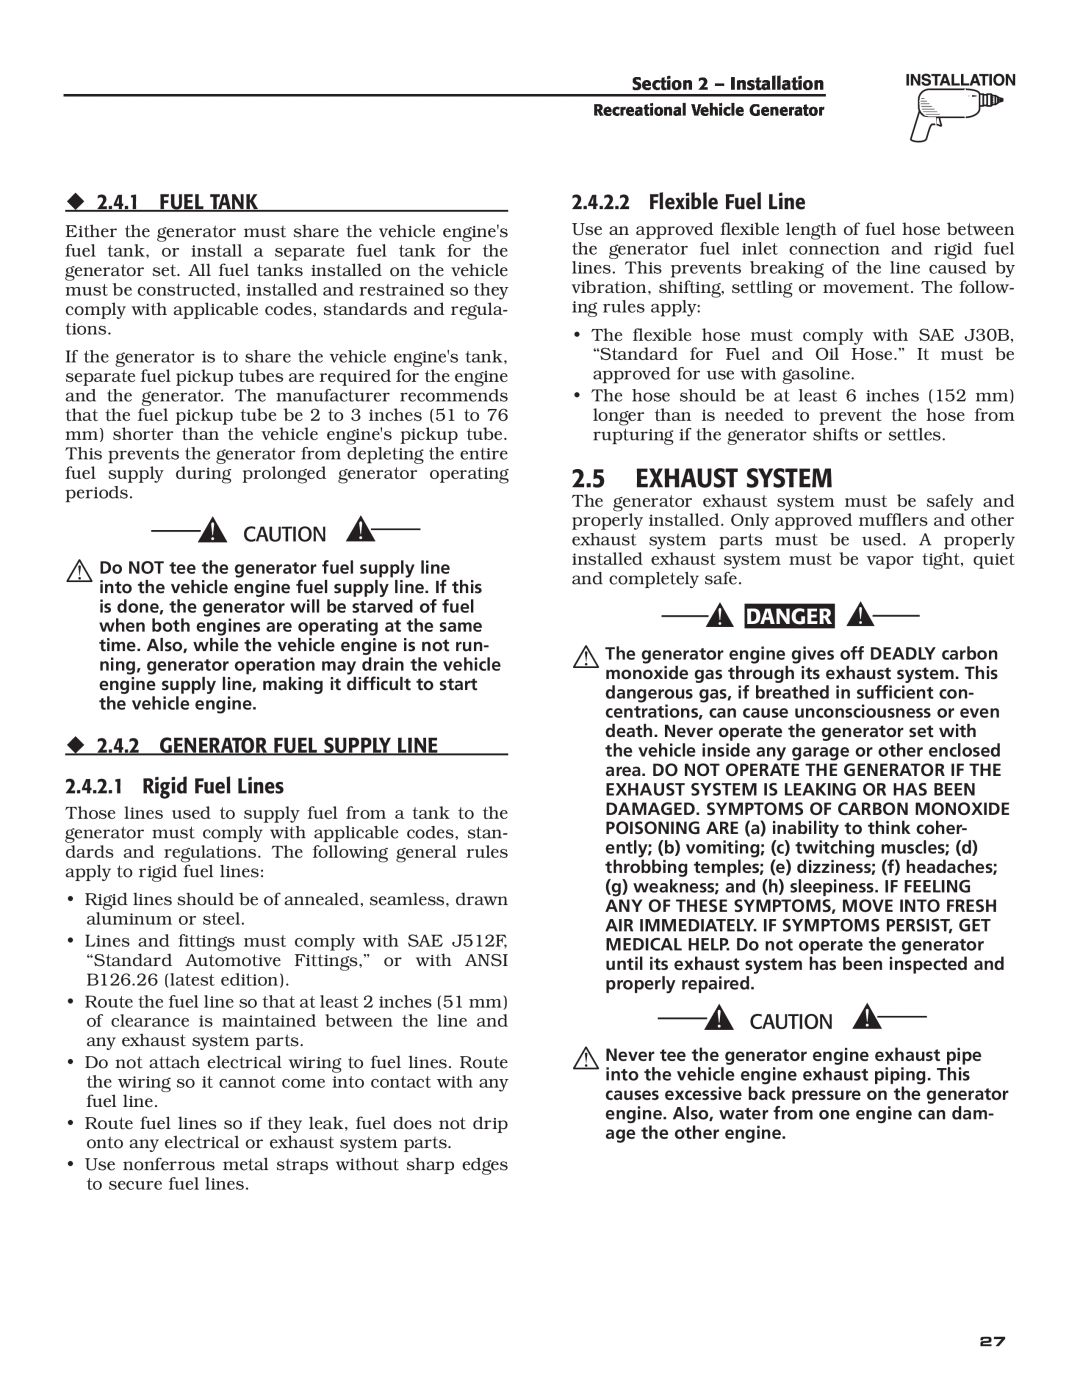 Generac Power Systems 004700-00 owner manual Exhaust System, ‹ 2.4.1 FUEL TANK, Flexible Fuel Line, Danger 